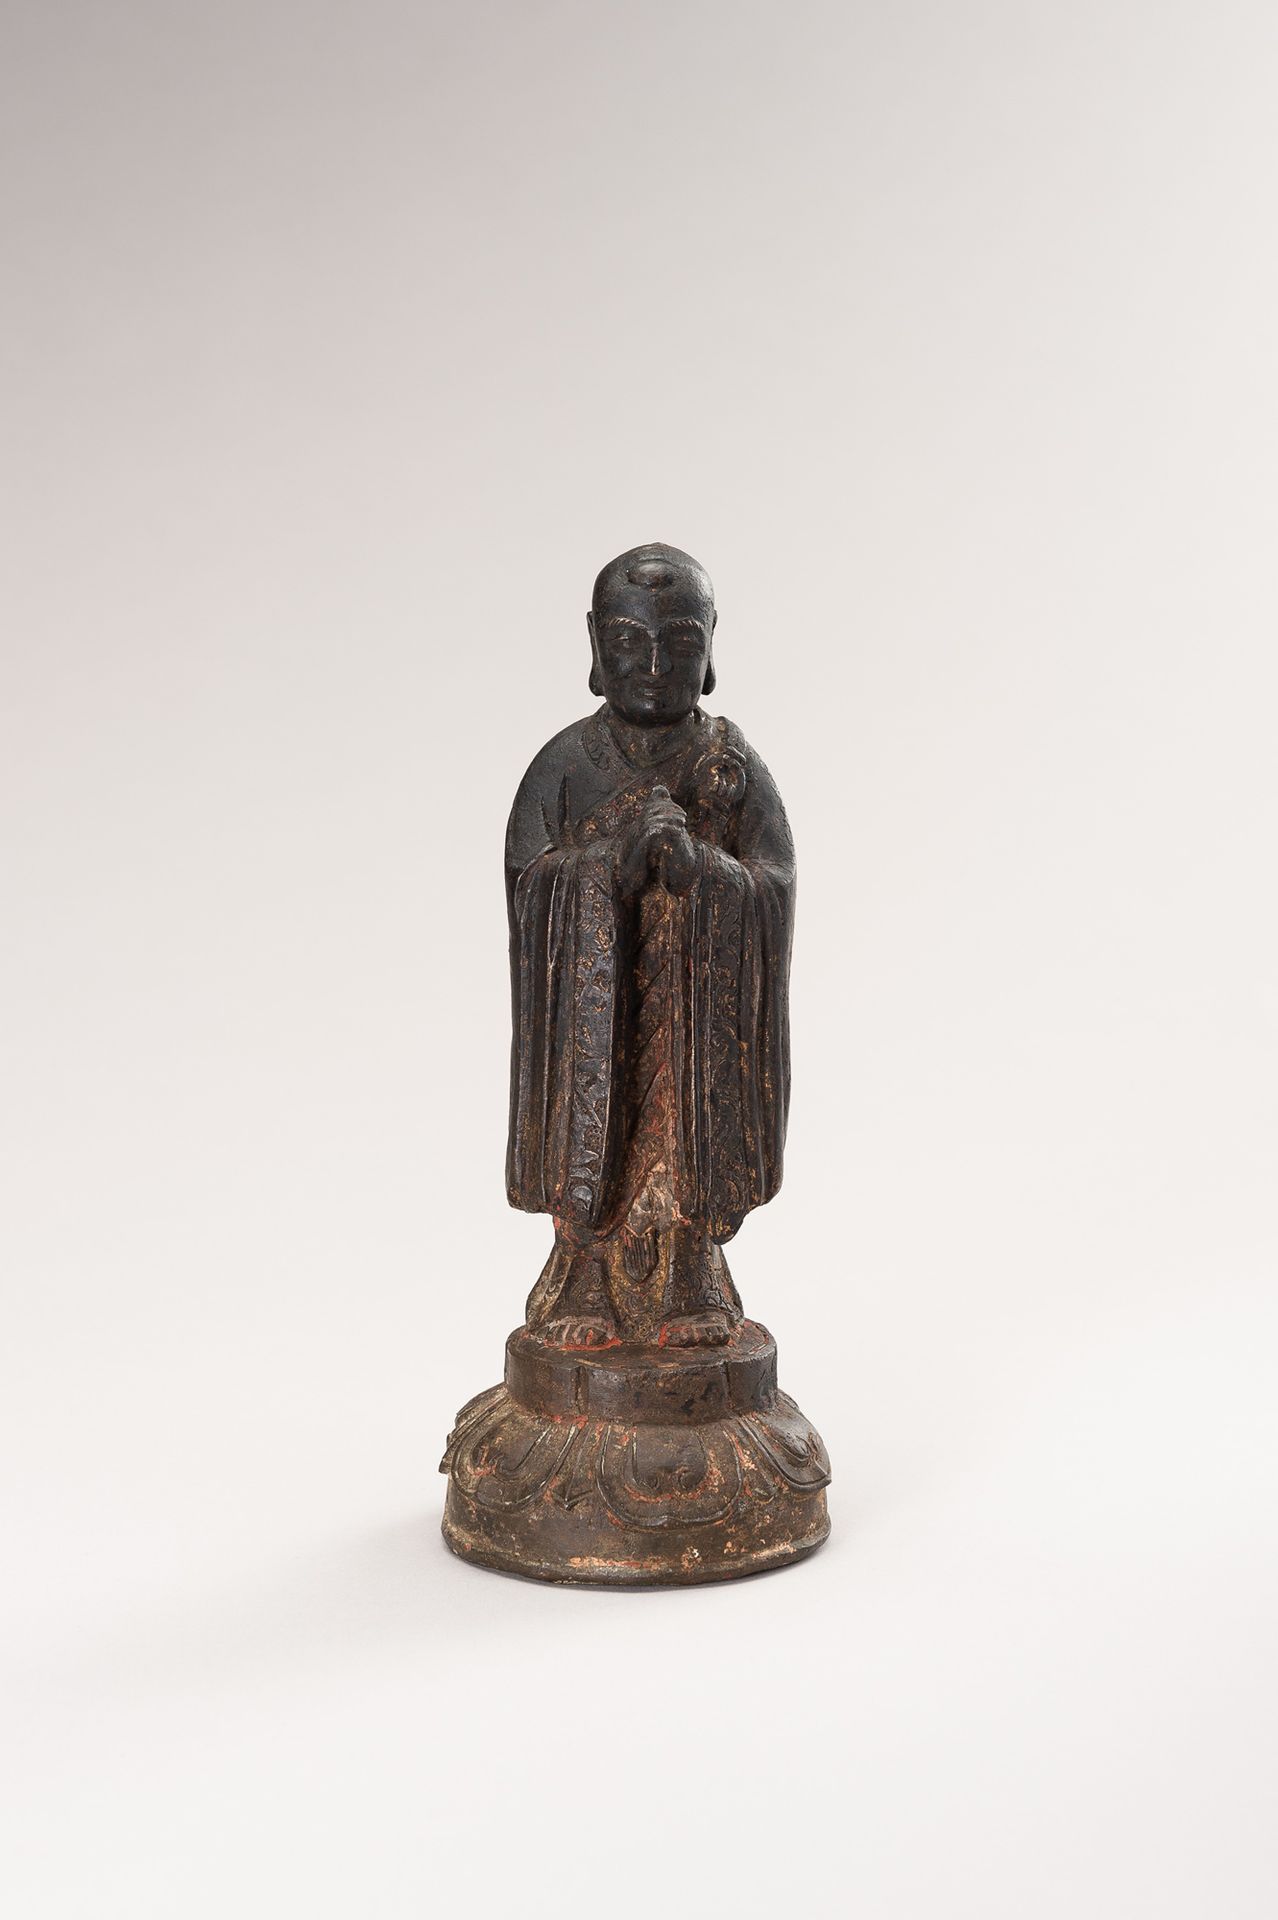 A BRONZE FIGURE OF A LUOHAN A BRONZE FIGURE OF A LUOHAN
China, Ming Dynasty (136&hellip;